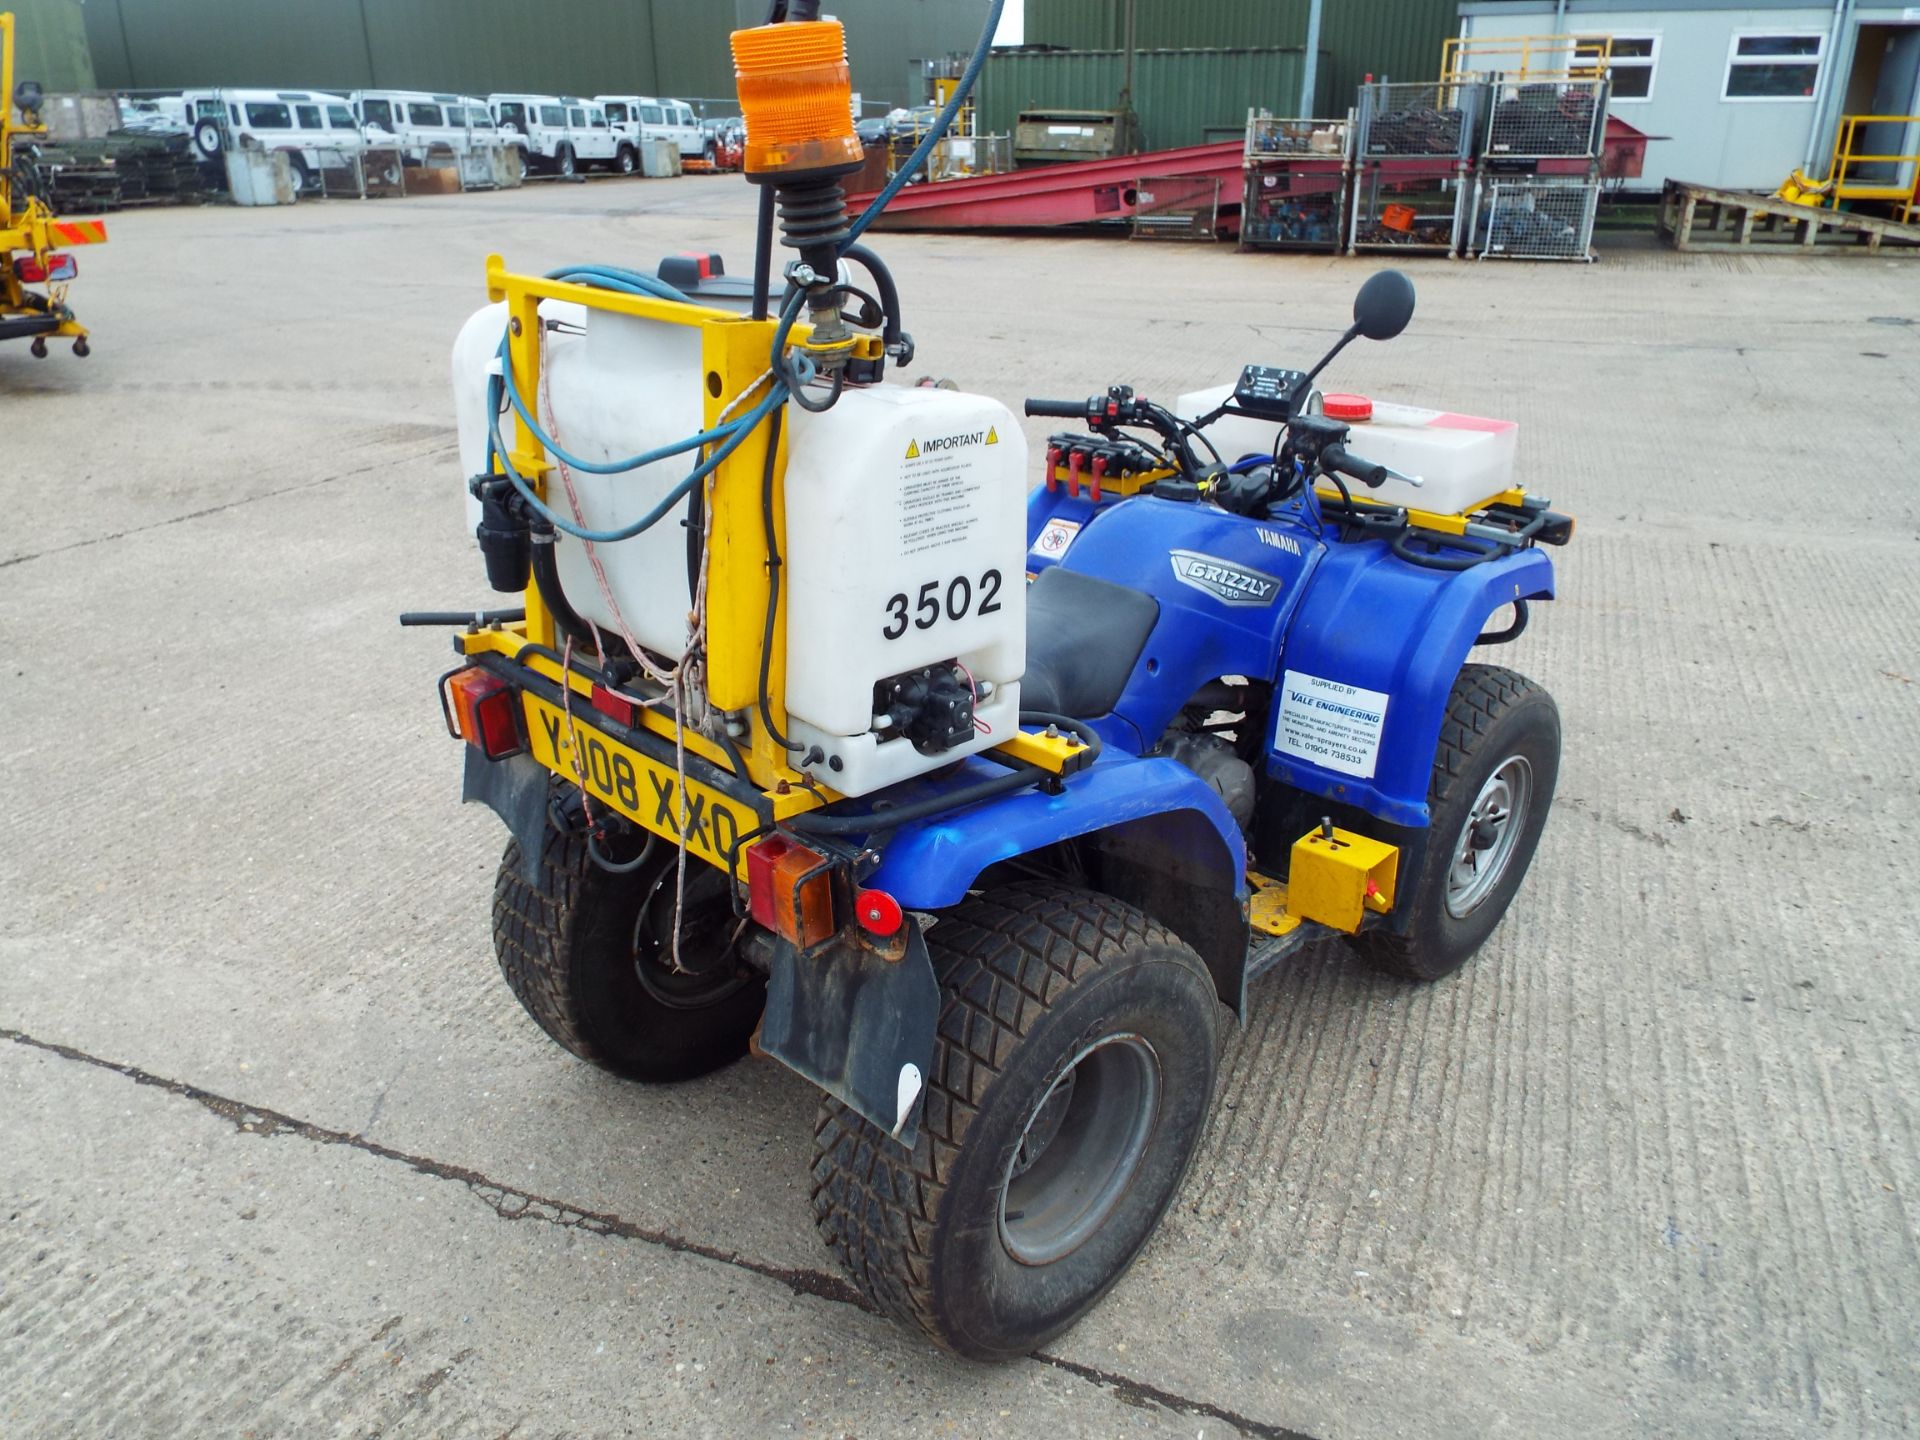 2008 Yamaha Grizzly 350 Ultramatic Quad Bike fitted with Vale Front/Rear Spraying Equipment - Image 7 of 26